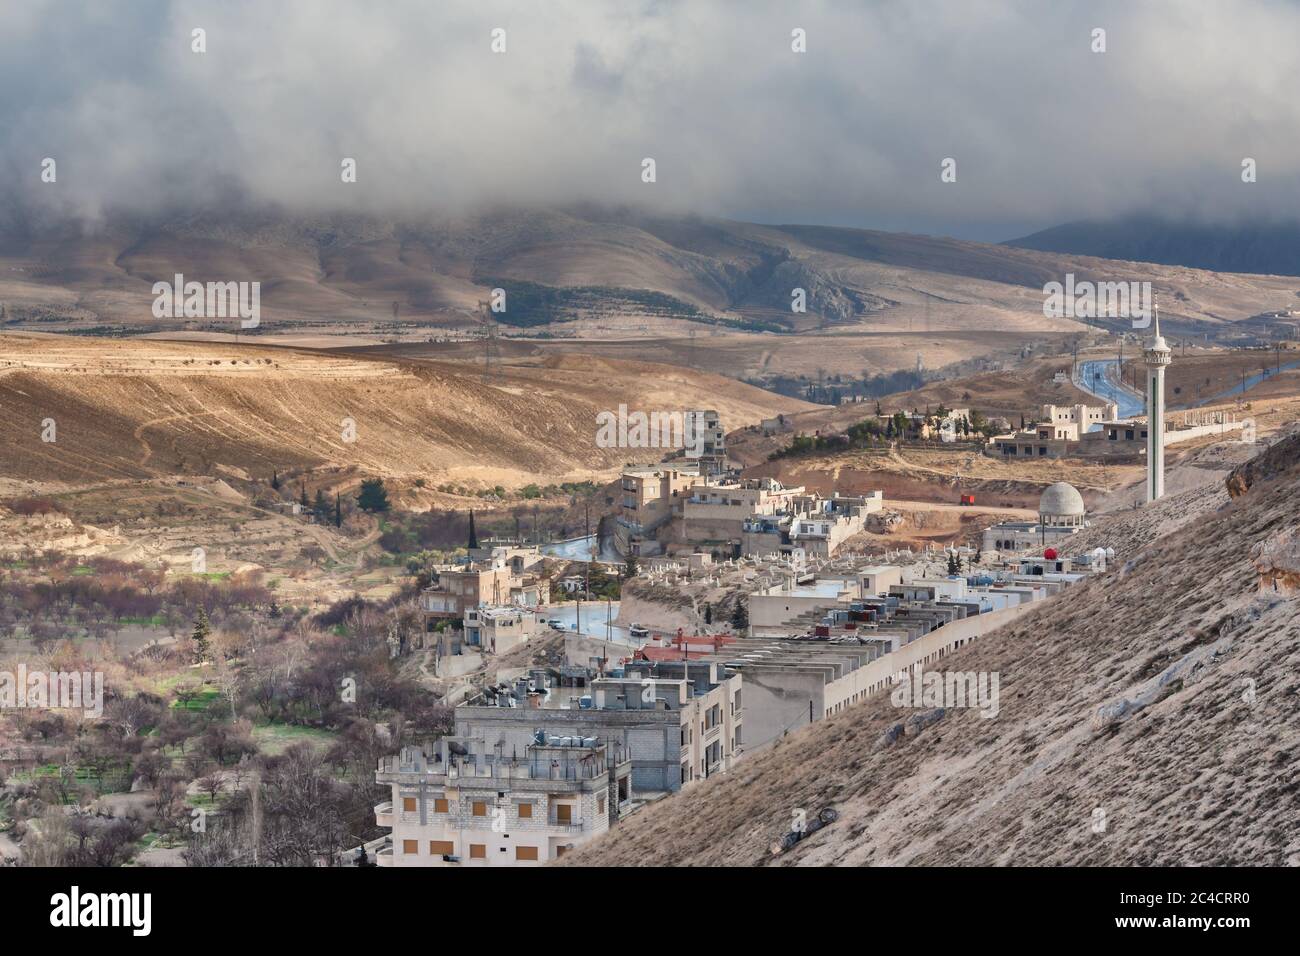 Maloula, Maalula, village with the monastery of Mar Sarkis, St. Sergius on top of hill, Syria Stock Photo